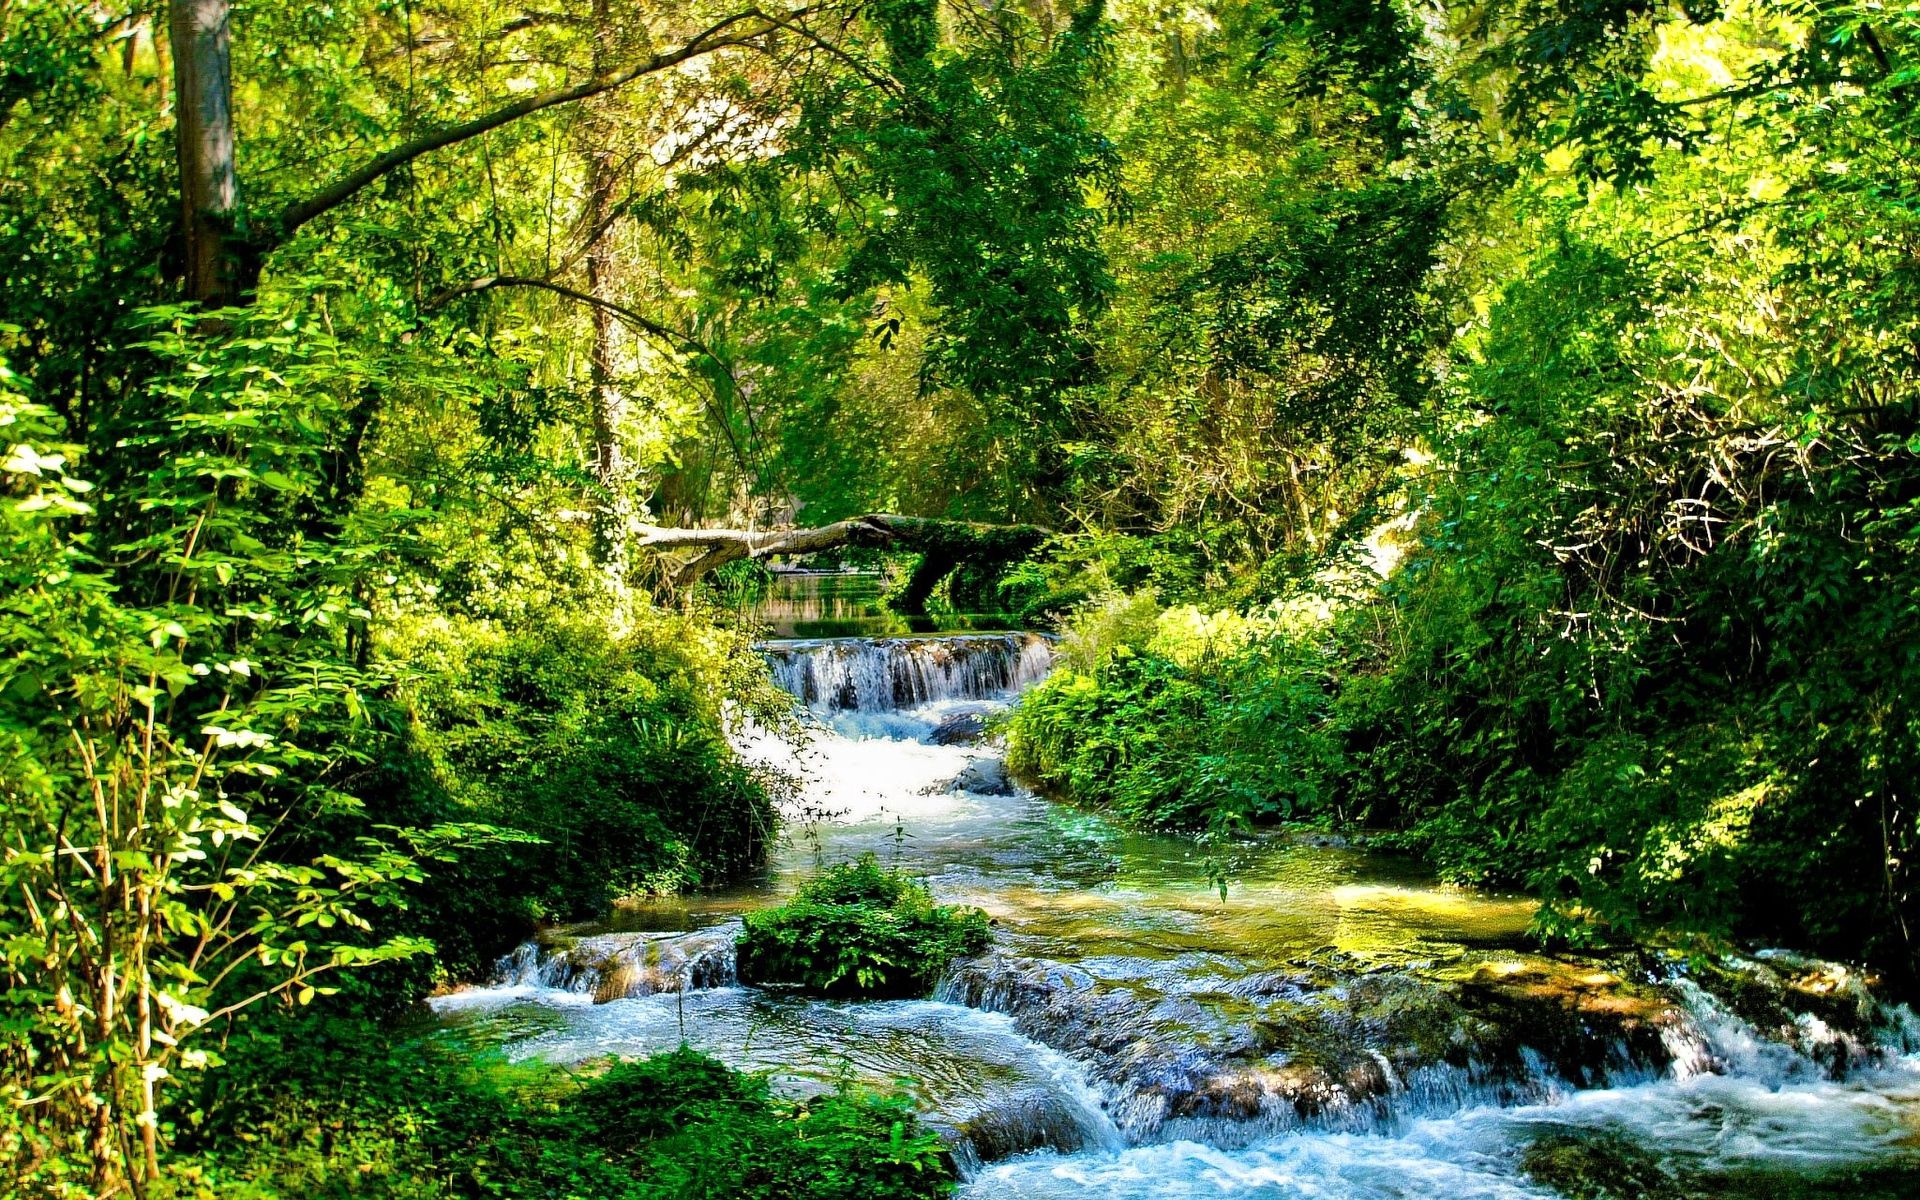 android summer, contrast, green, nature, rivers, forest, cascades, flow, stream, shadows, brightly, thicket, thickets